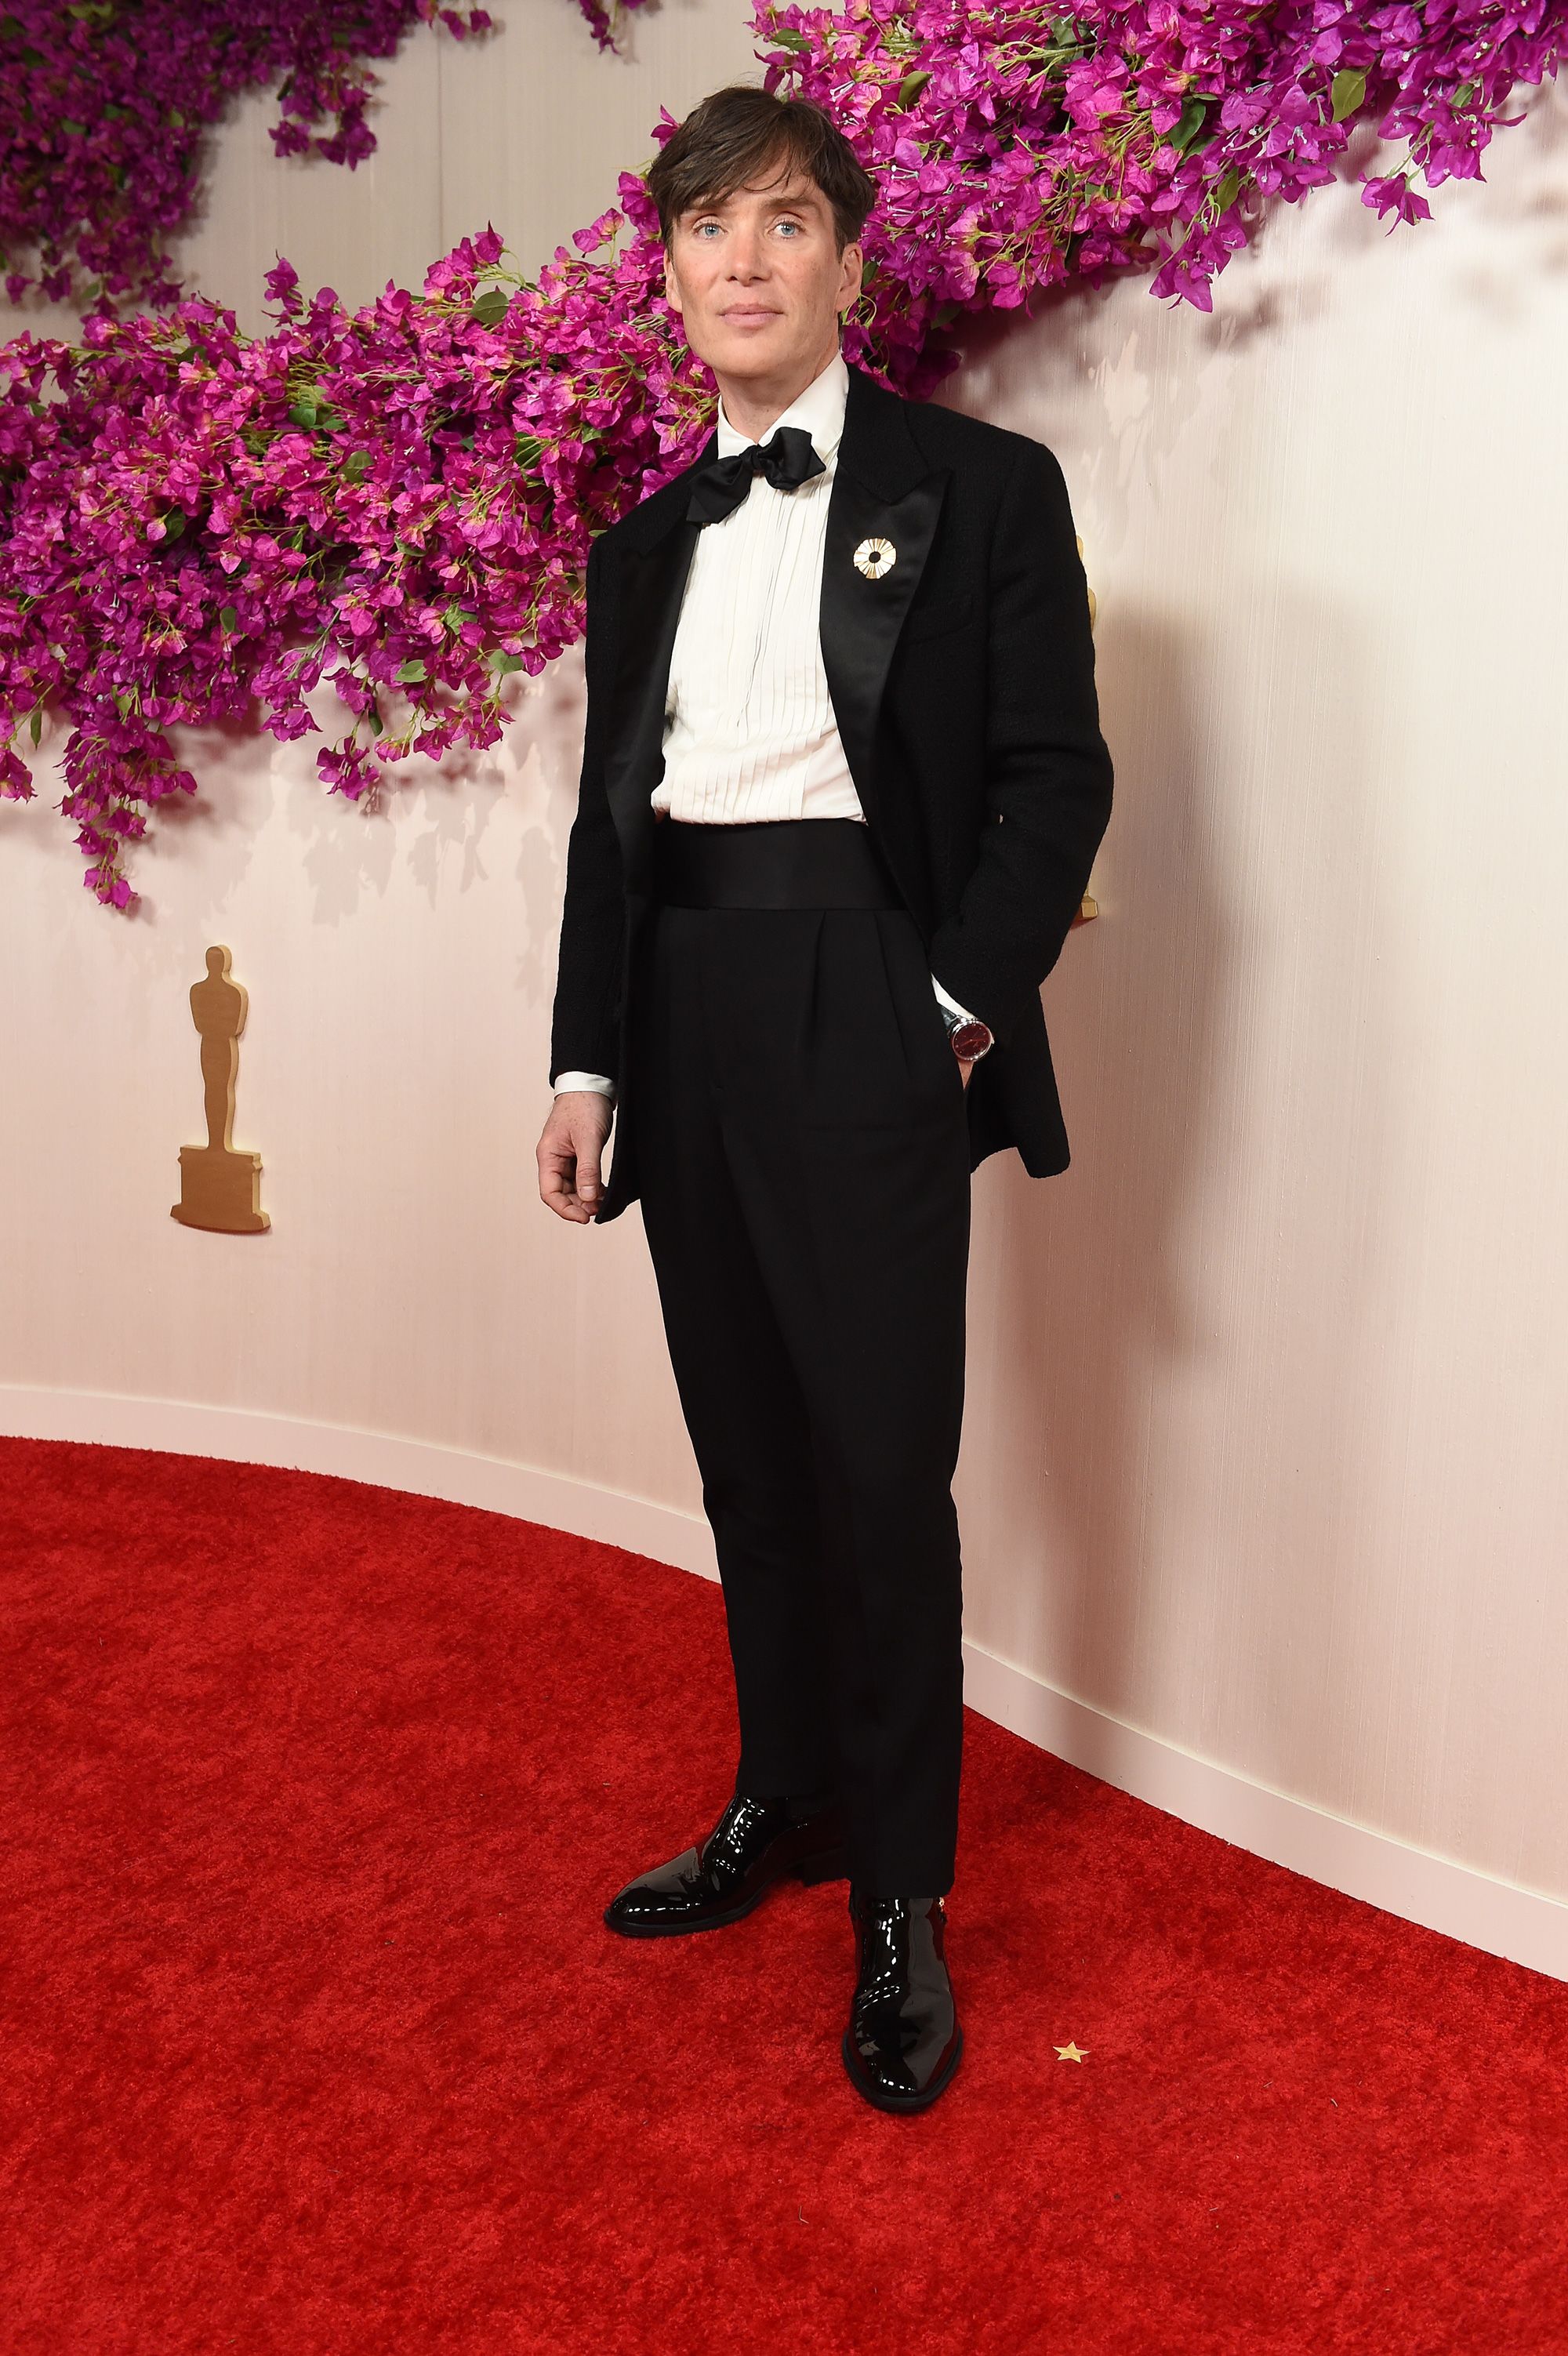 Cillian Murphy wore a custom Atelier Versace suit topped with a gemstone brooch designed by jewelry brand Saauvereign for Hong Kong-based designer Bertrand Mak.